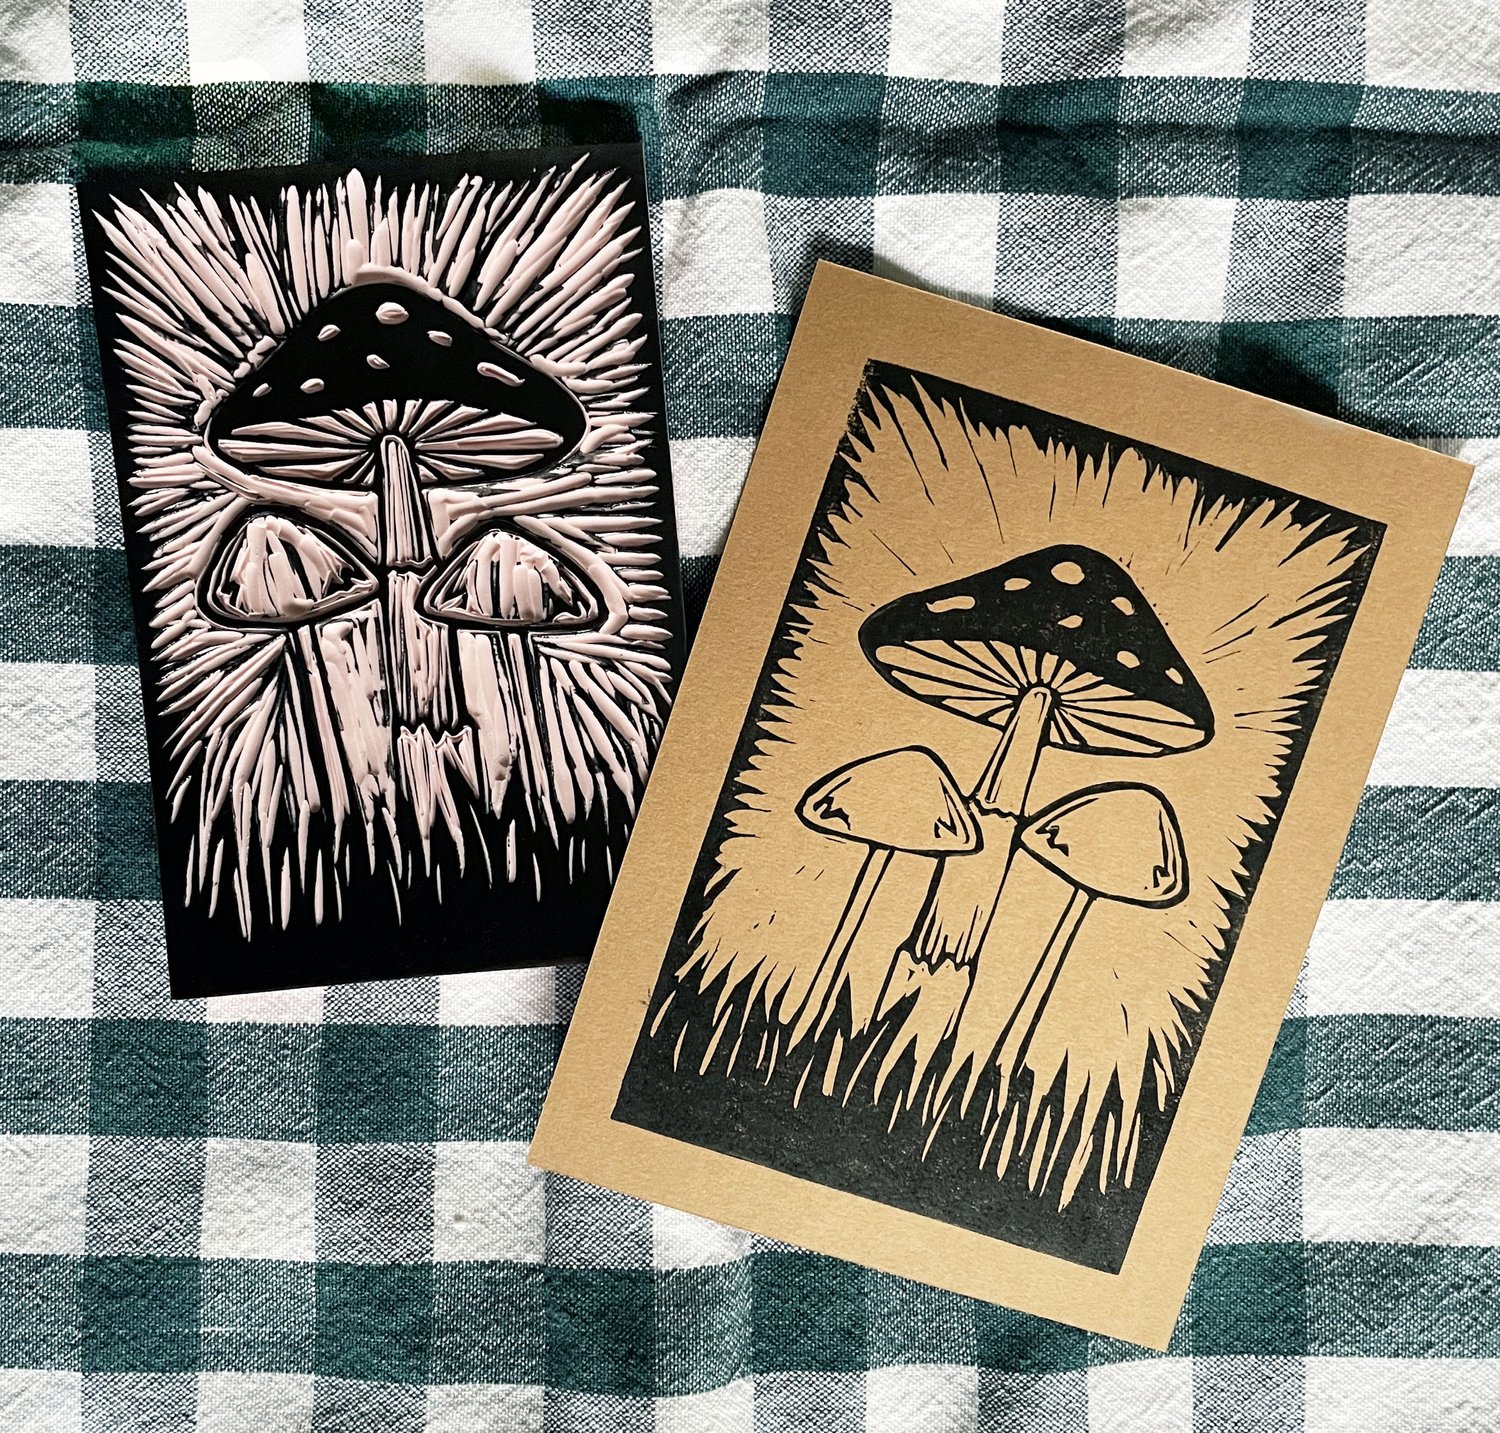 Block Print Carving Class with Emily Tyman — Little Button Craft